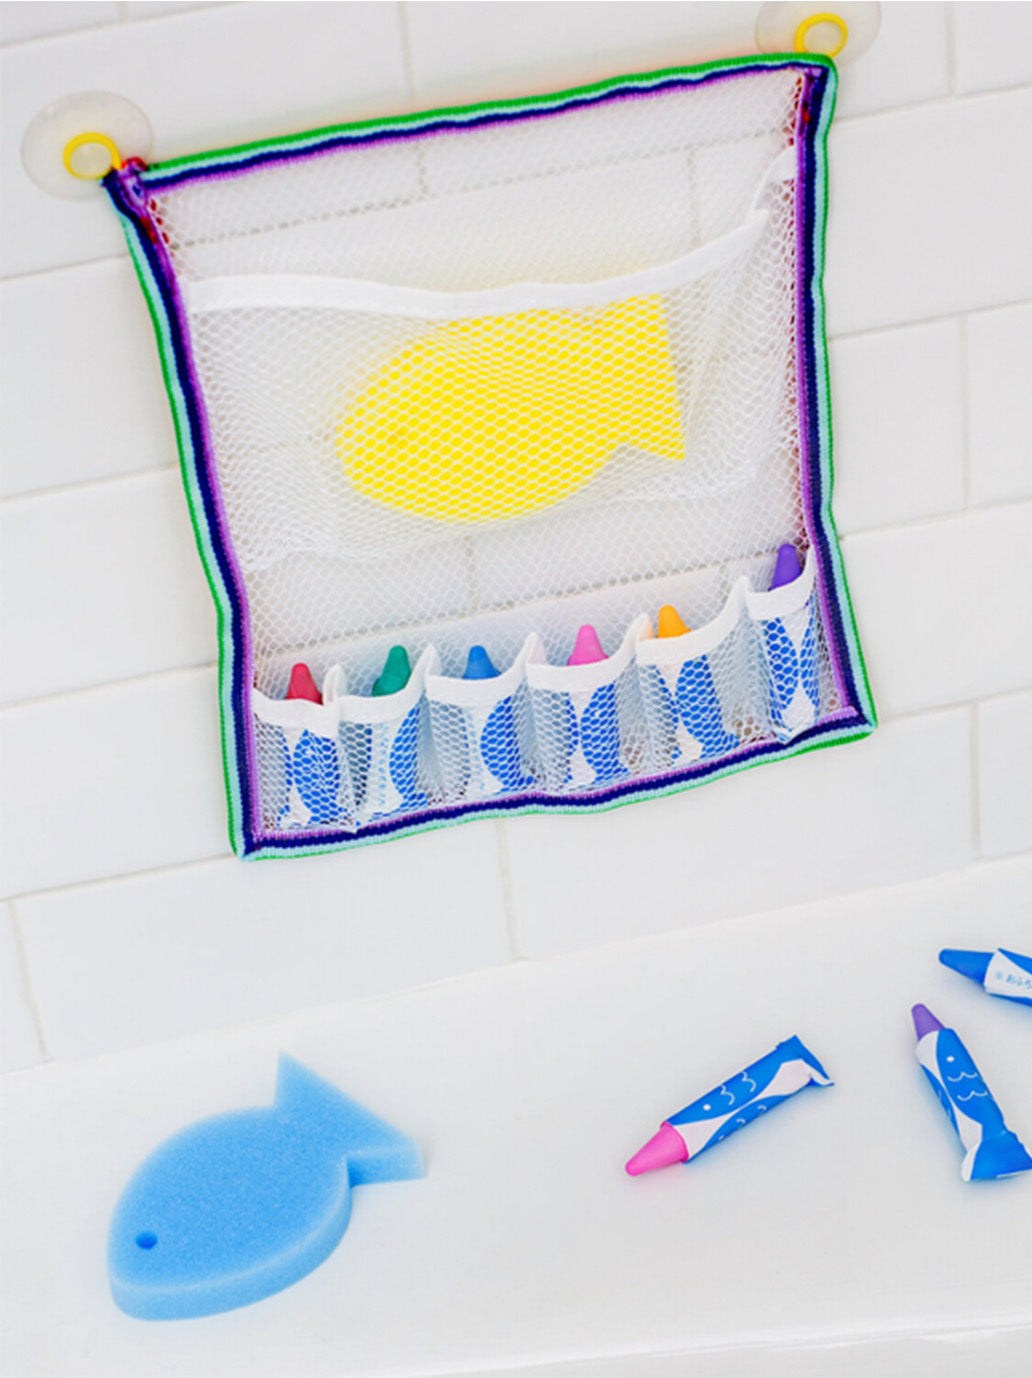 Crayons for painting in a bathtub with an organizer and a sponge